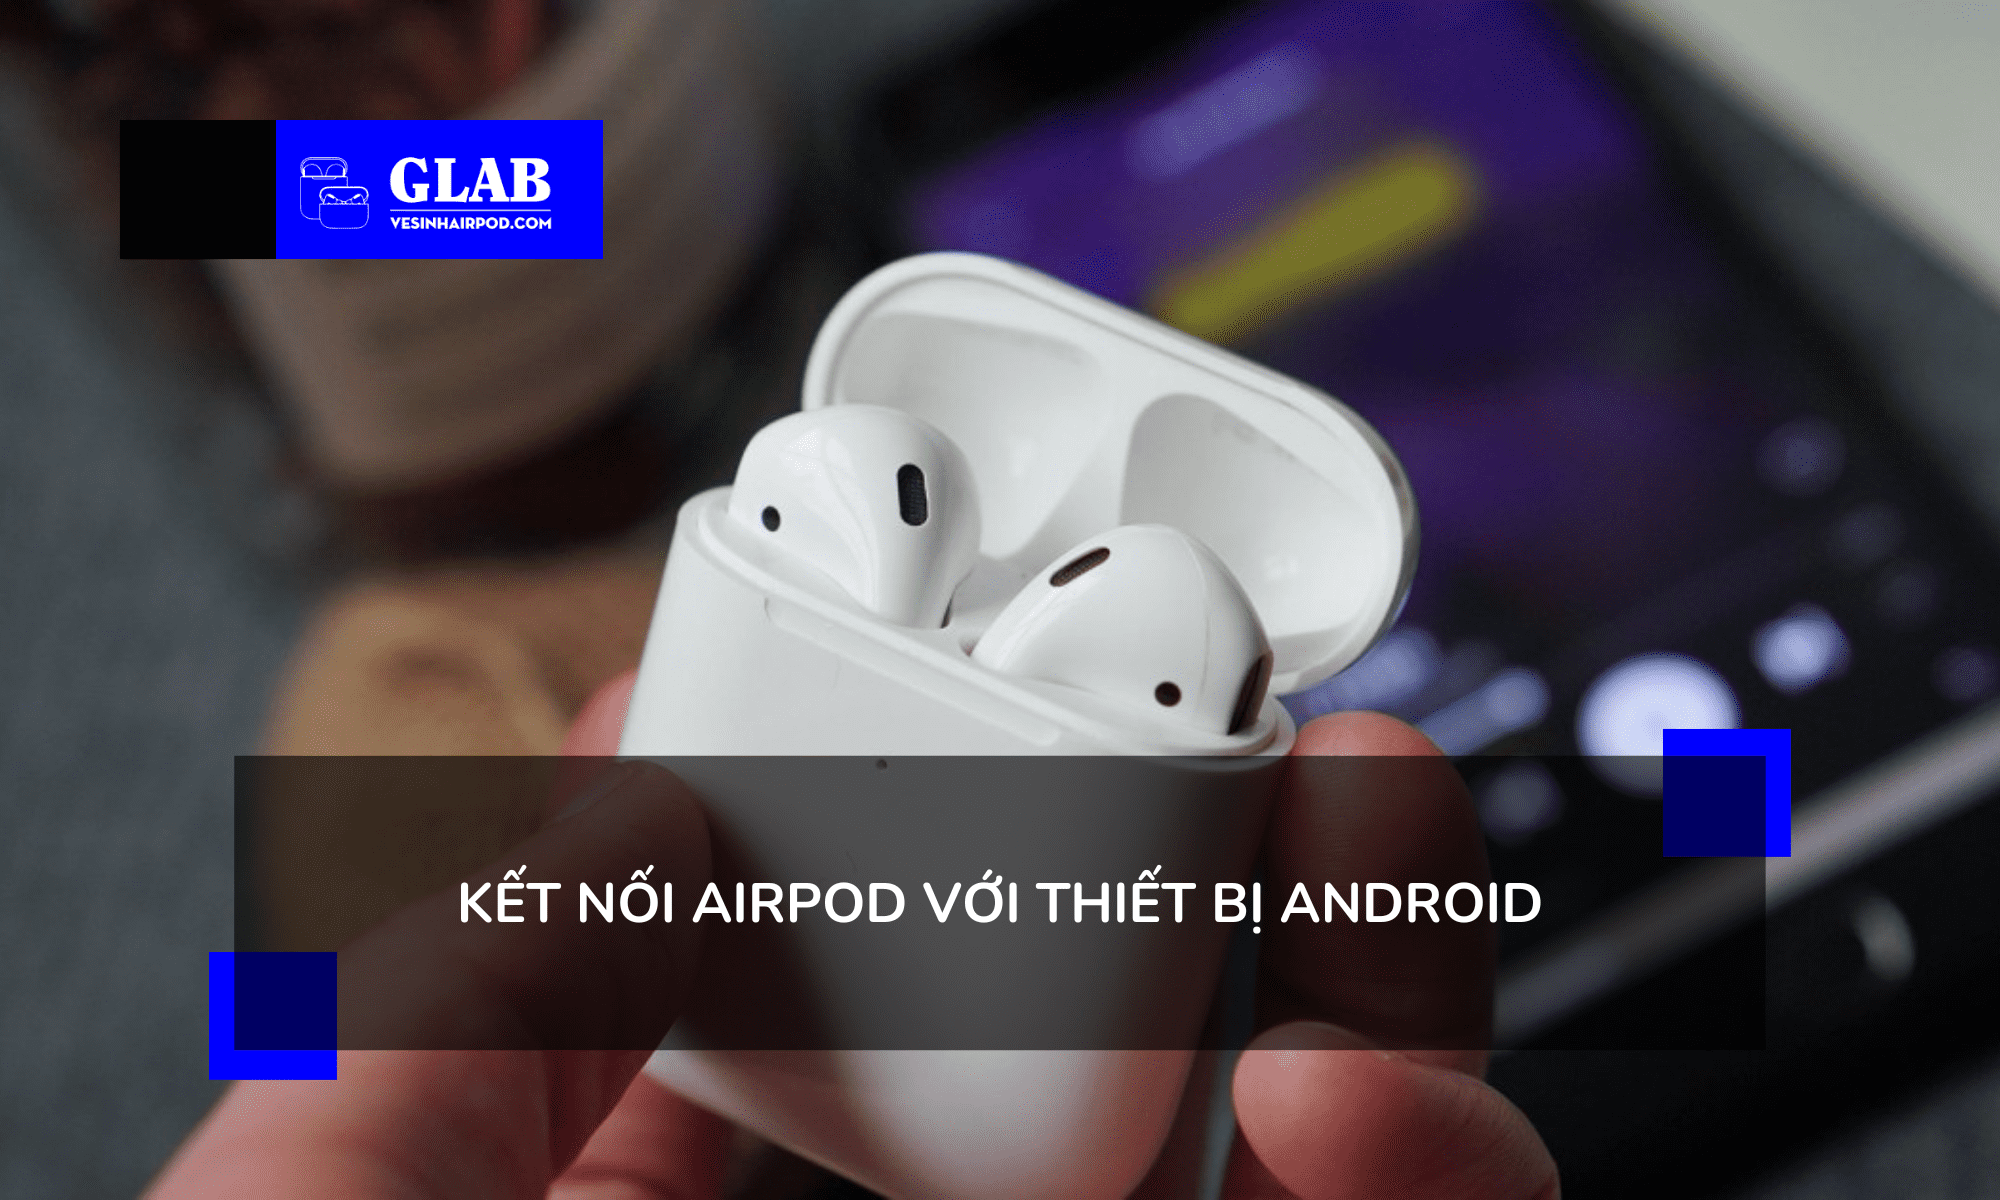 cach-tim-airpods-tren-android